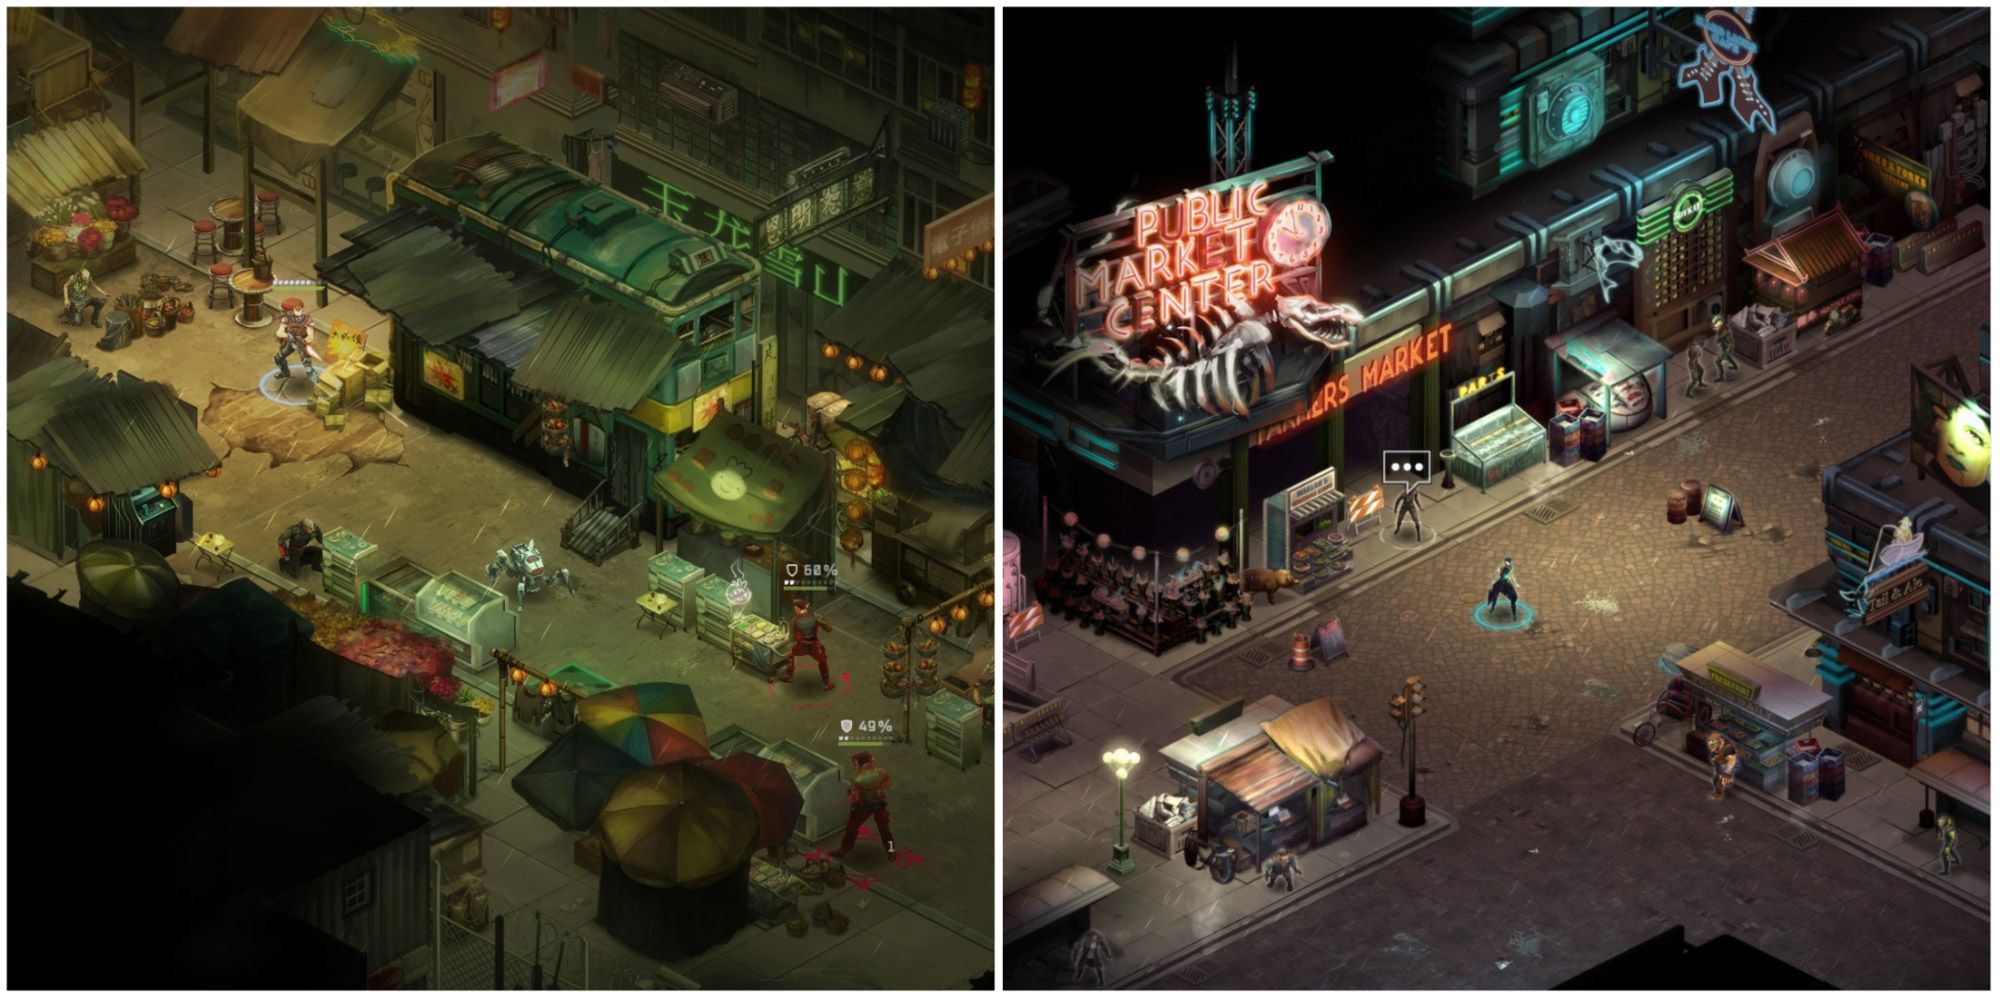 A collage showing gameplay in the Shadowrun Trilogy